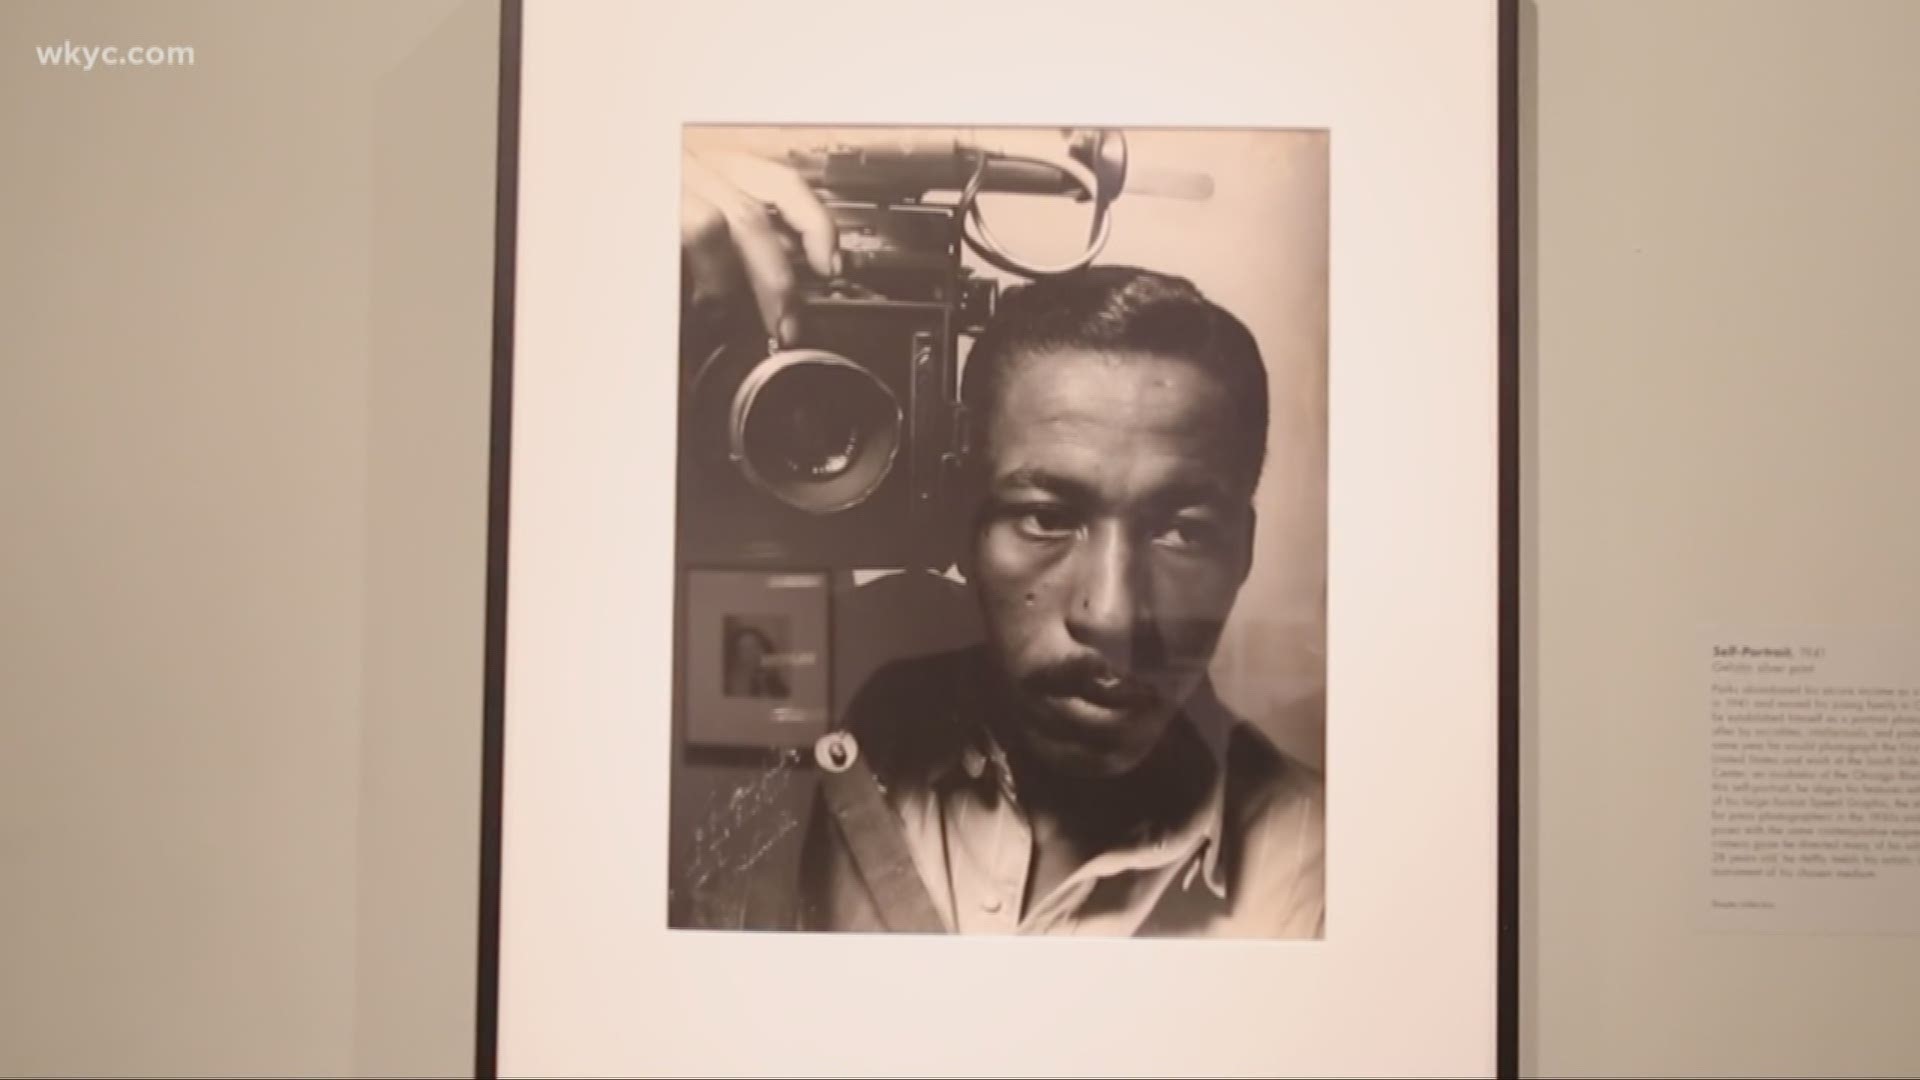 Leon Bibb Reports: Gordon Parks and his power with a camera